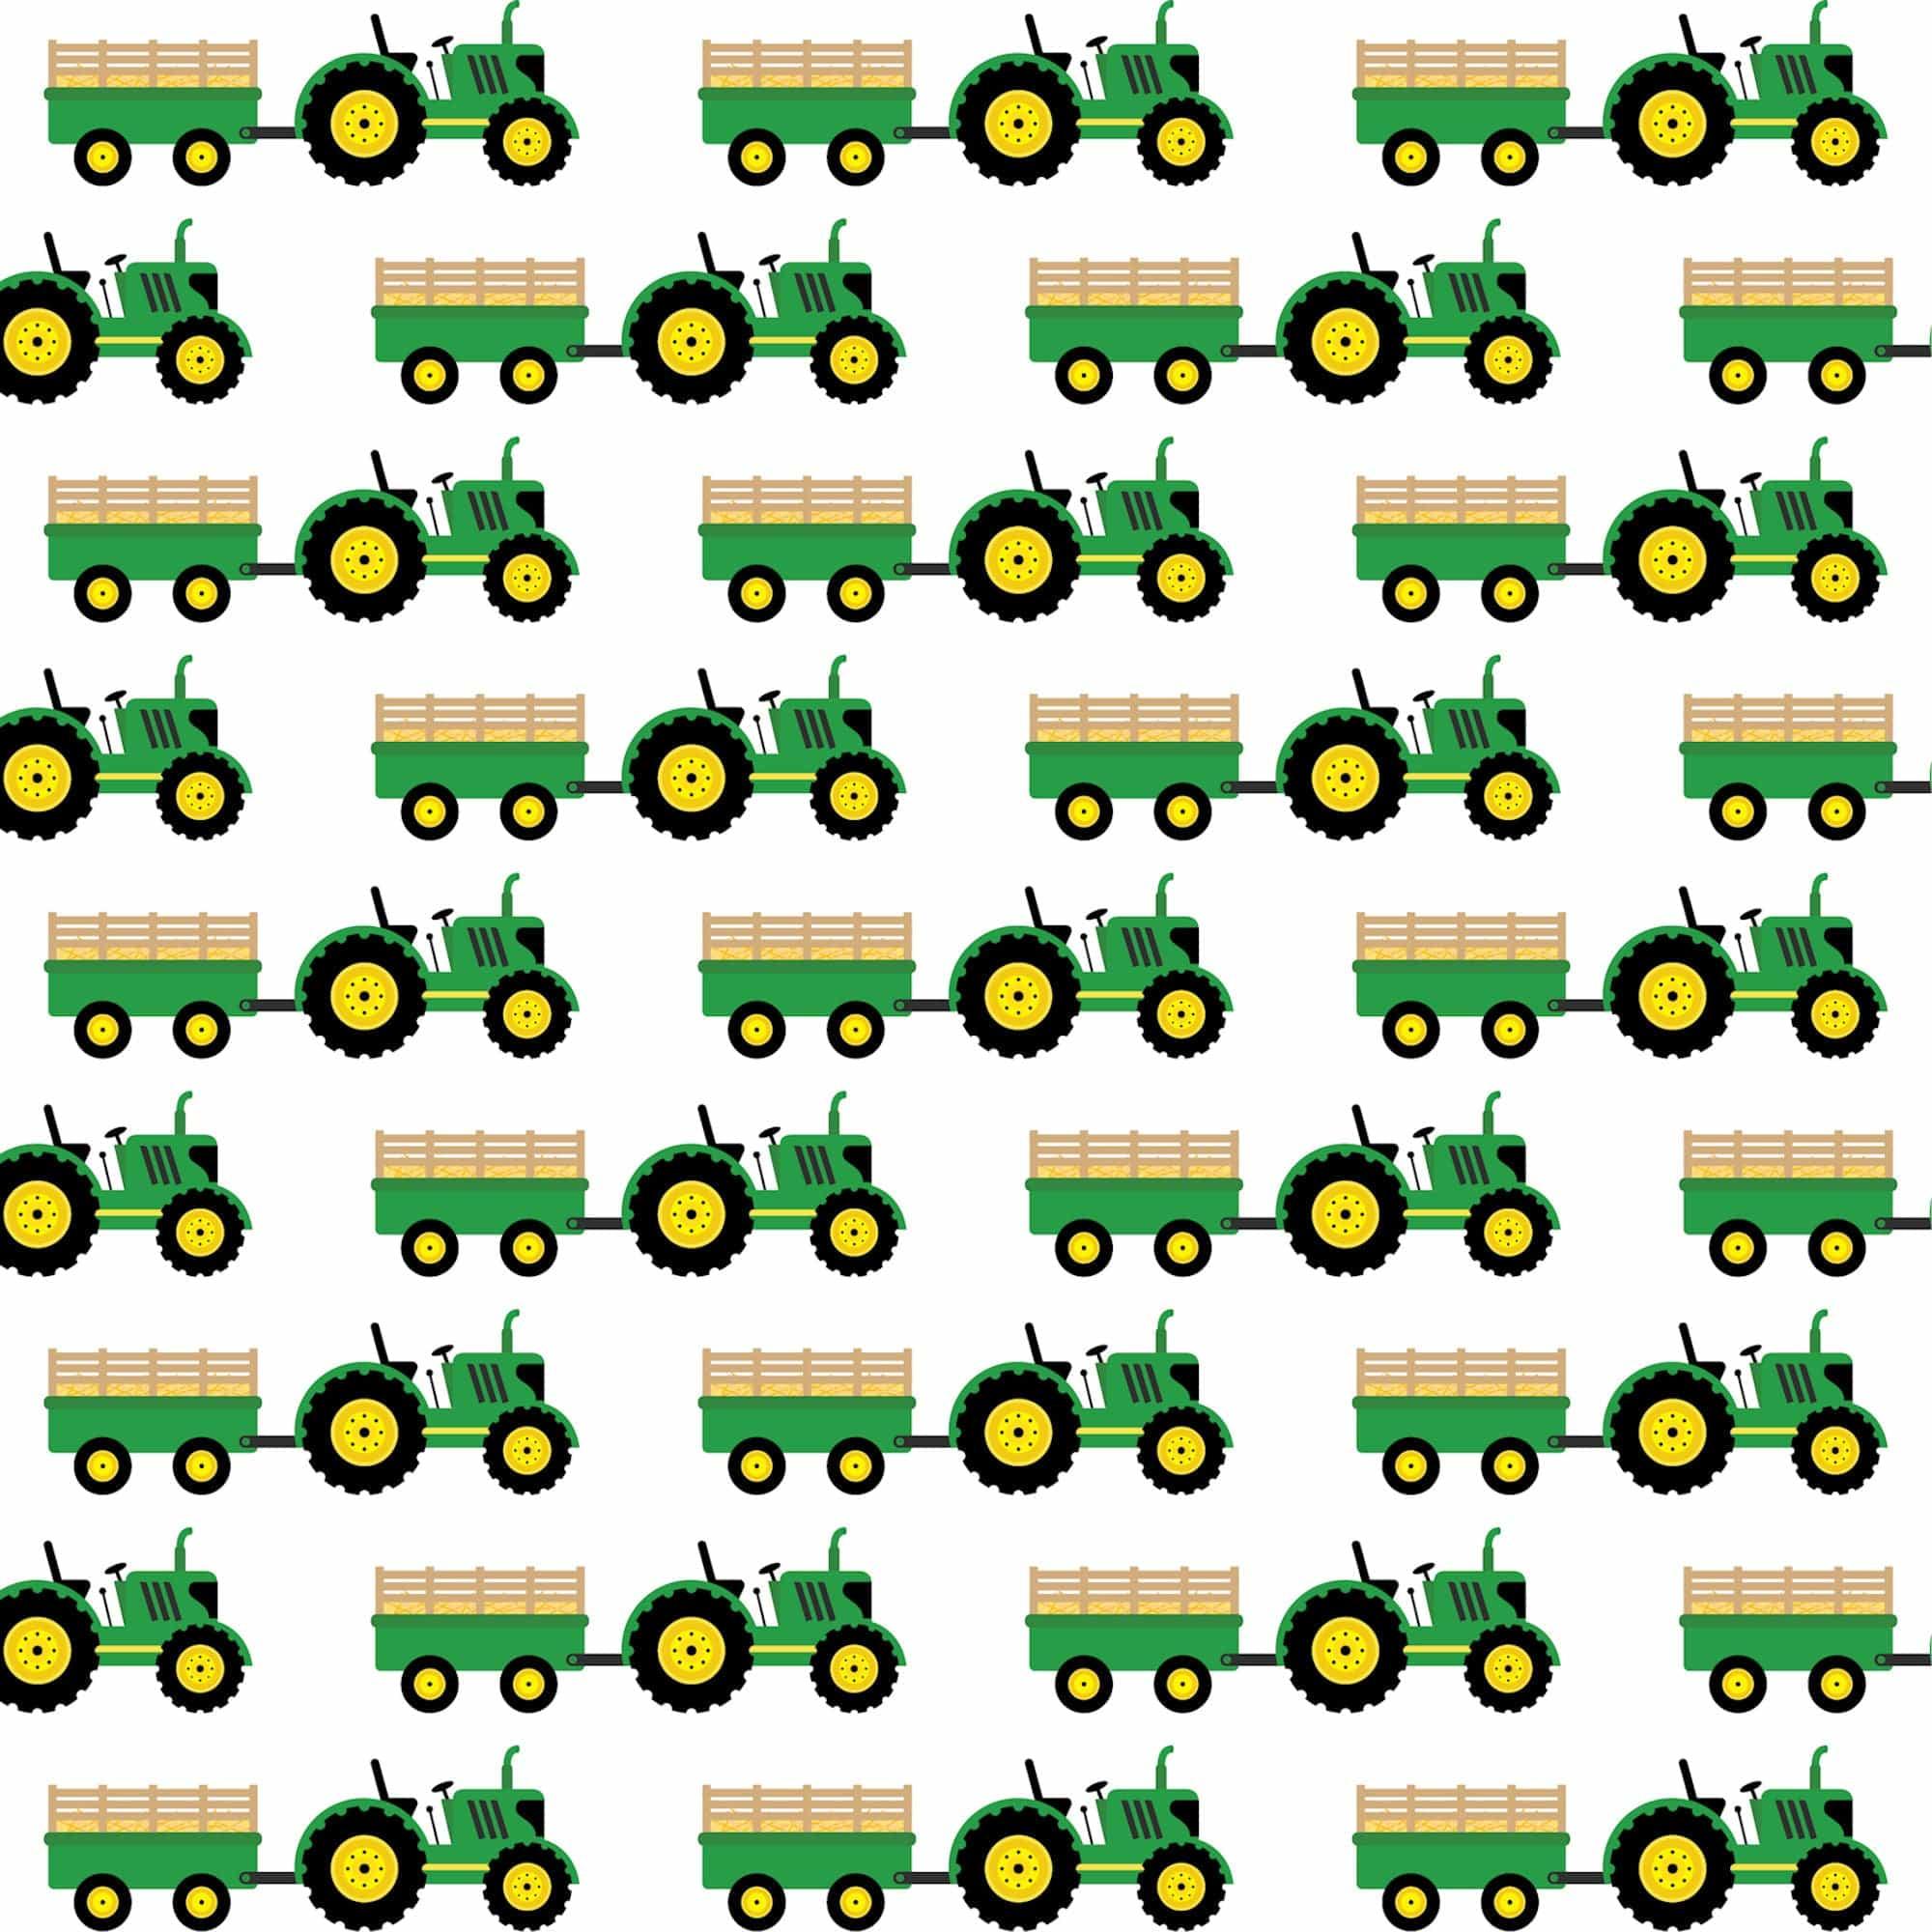 Tractor Time Collection Crop Hopper 12 x 12 Double-Sided Scrapbook Paper by SSC Designs - Scrapbook Supply Companies